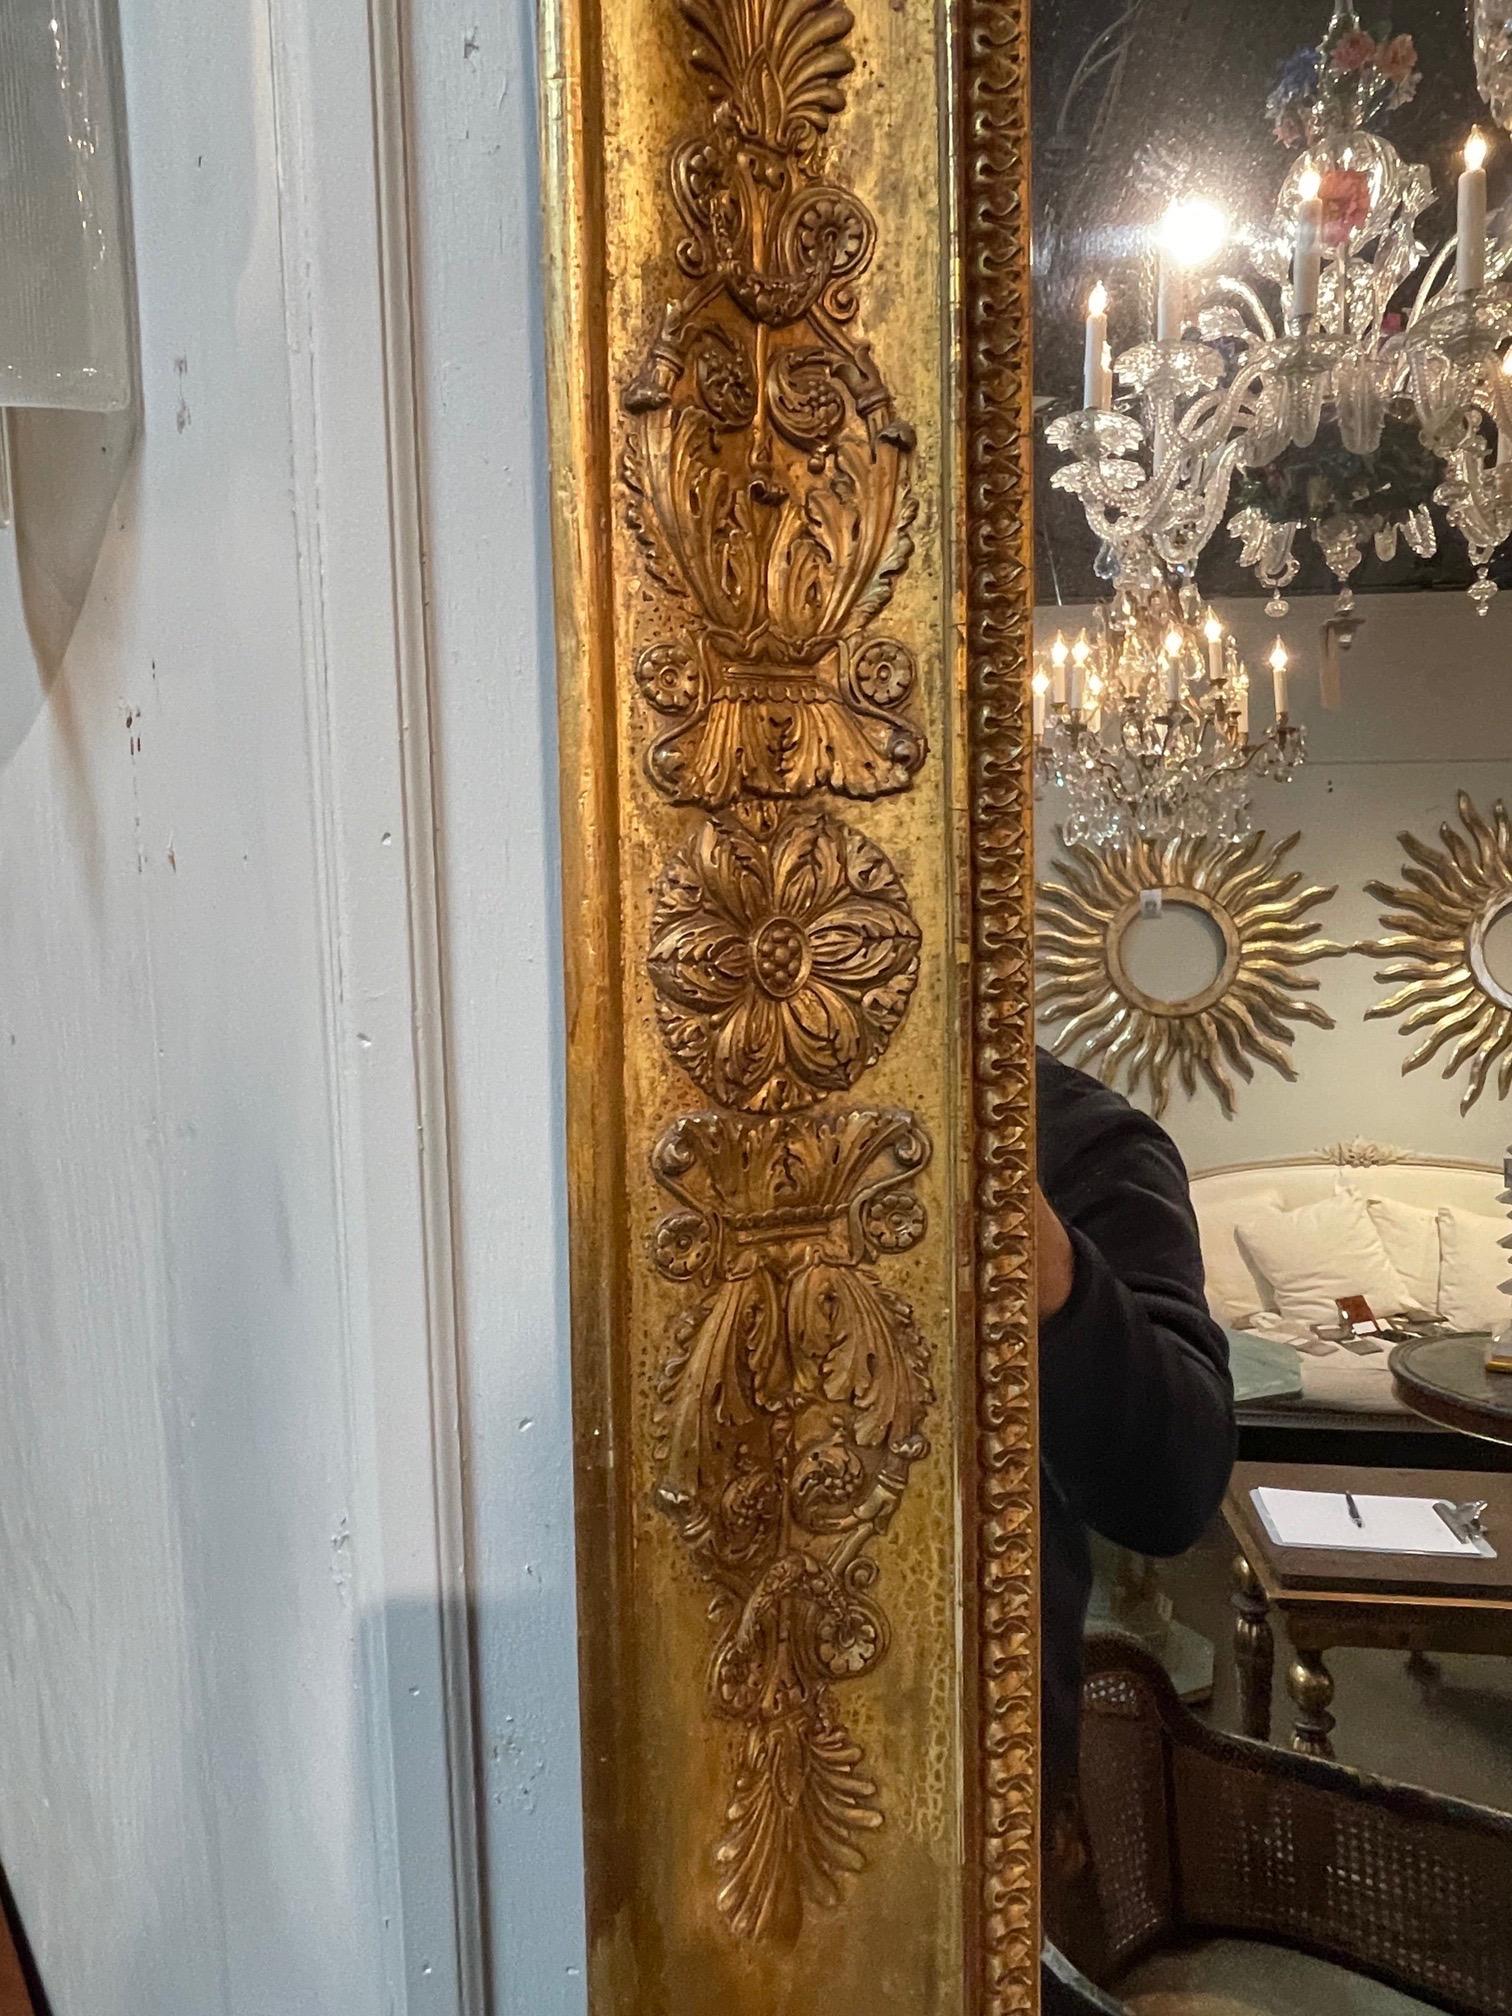 Elegant French Napoleon II giltwood mirror. Lovely floral images and a beaded inner border along with a beautiful gilt make this extra special. Gorgeous!!